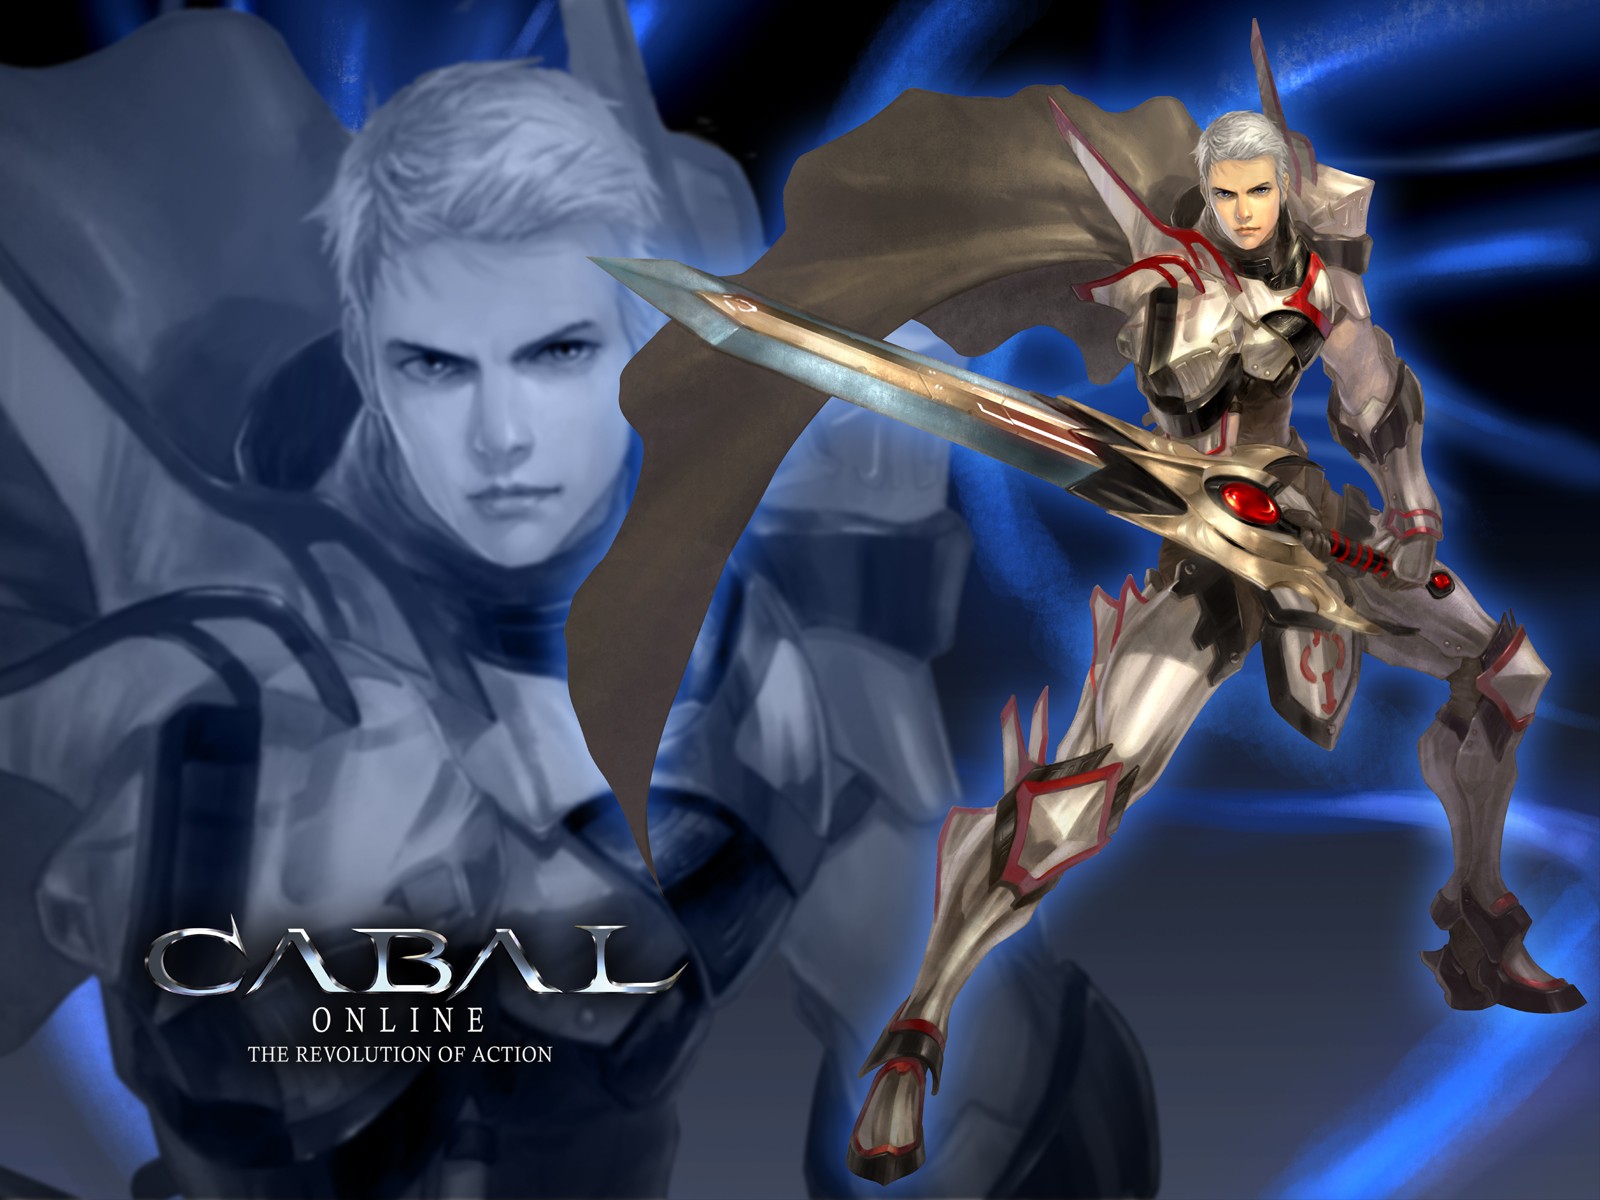 Cabal Online Game Wallpaper Cool HD Here